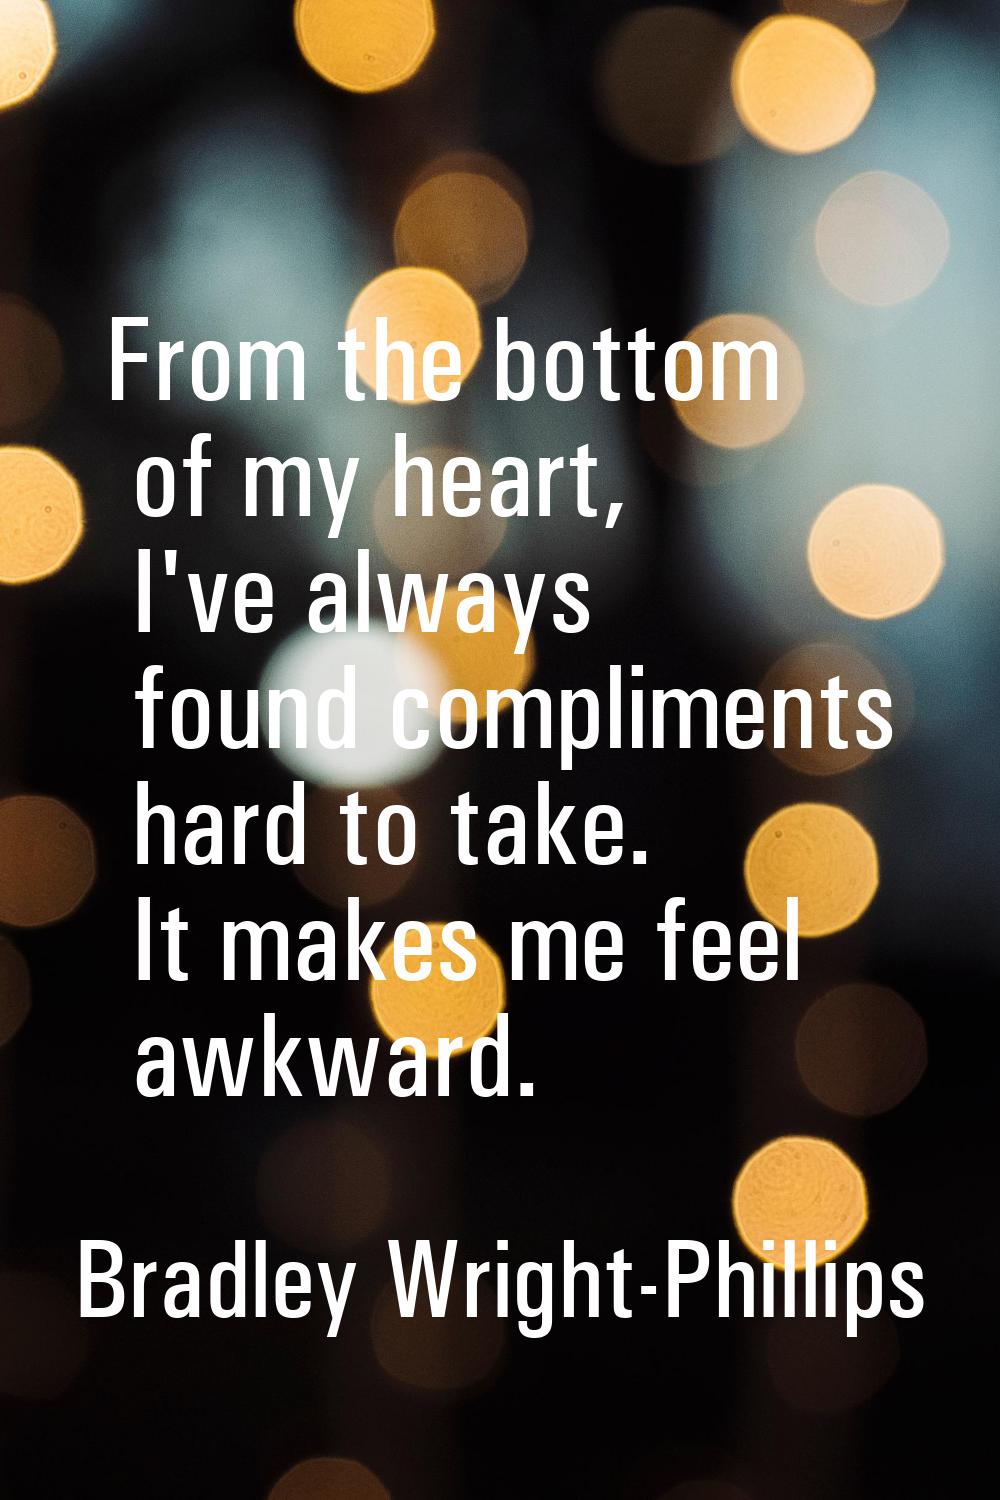 From the bottom of my heart, I've always found compliments hard to take. It makes me feel awkward.